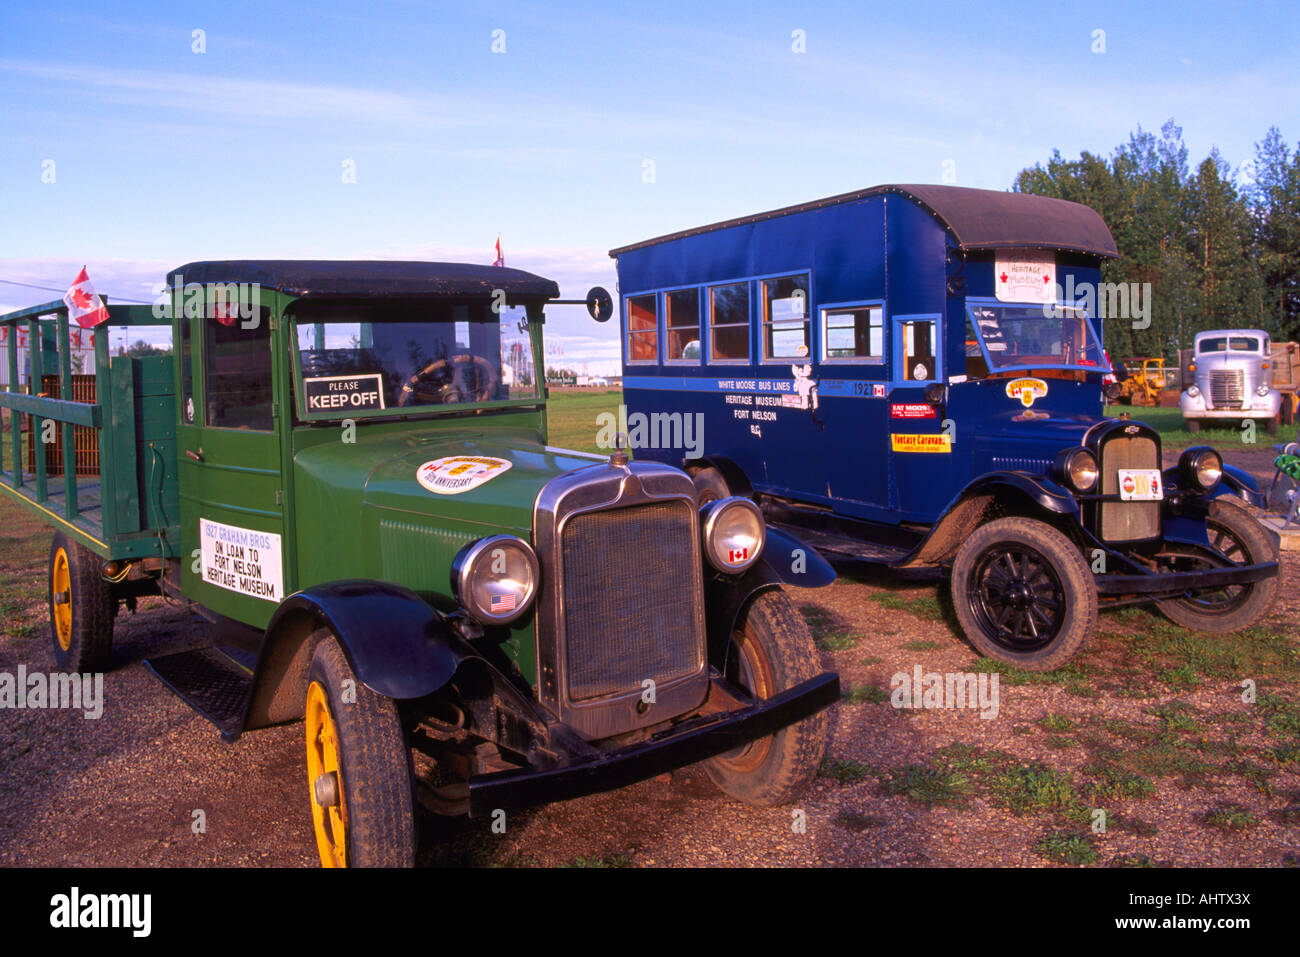 A 1927 Dodge Graham Truck and a Vintage Chevrolet Bus at the 'Fort Nelson' Heritage Museum in Northern British Columbia Canada Stock Photo